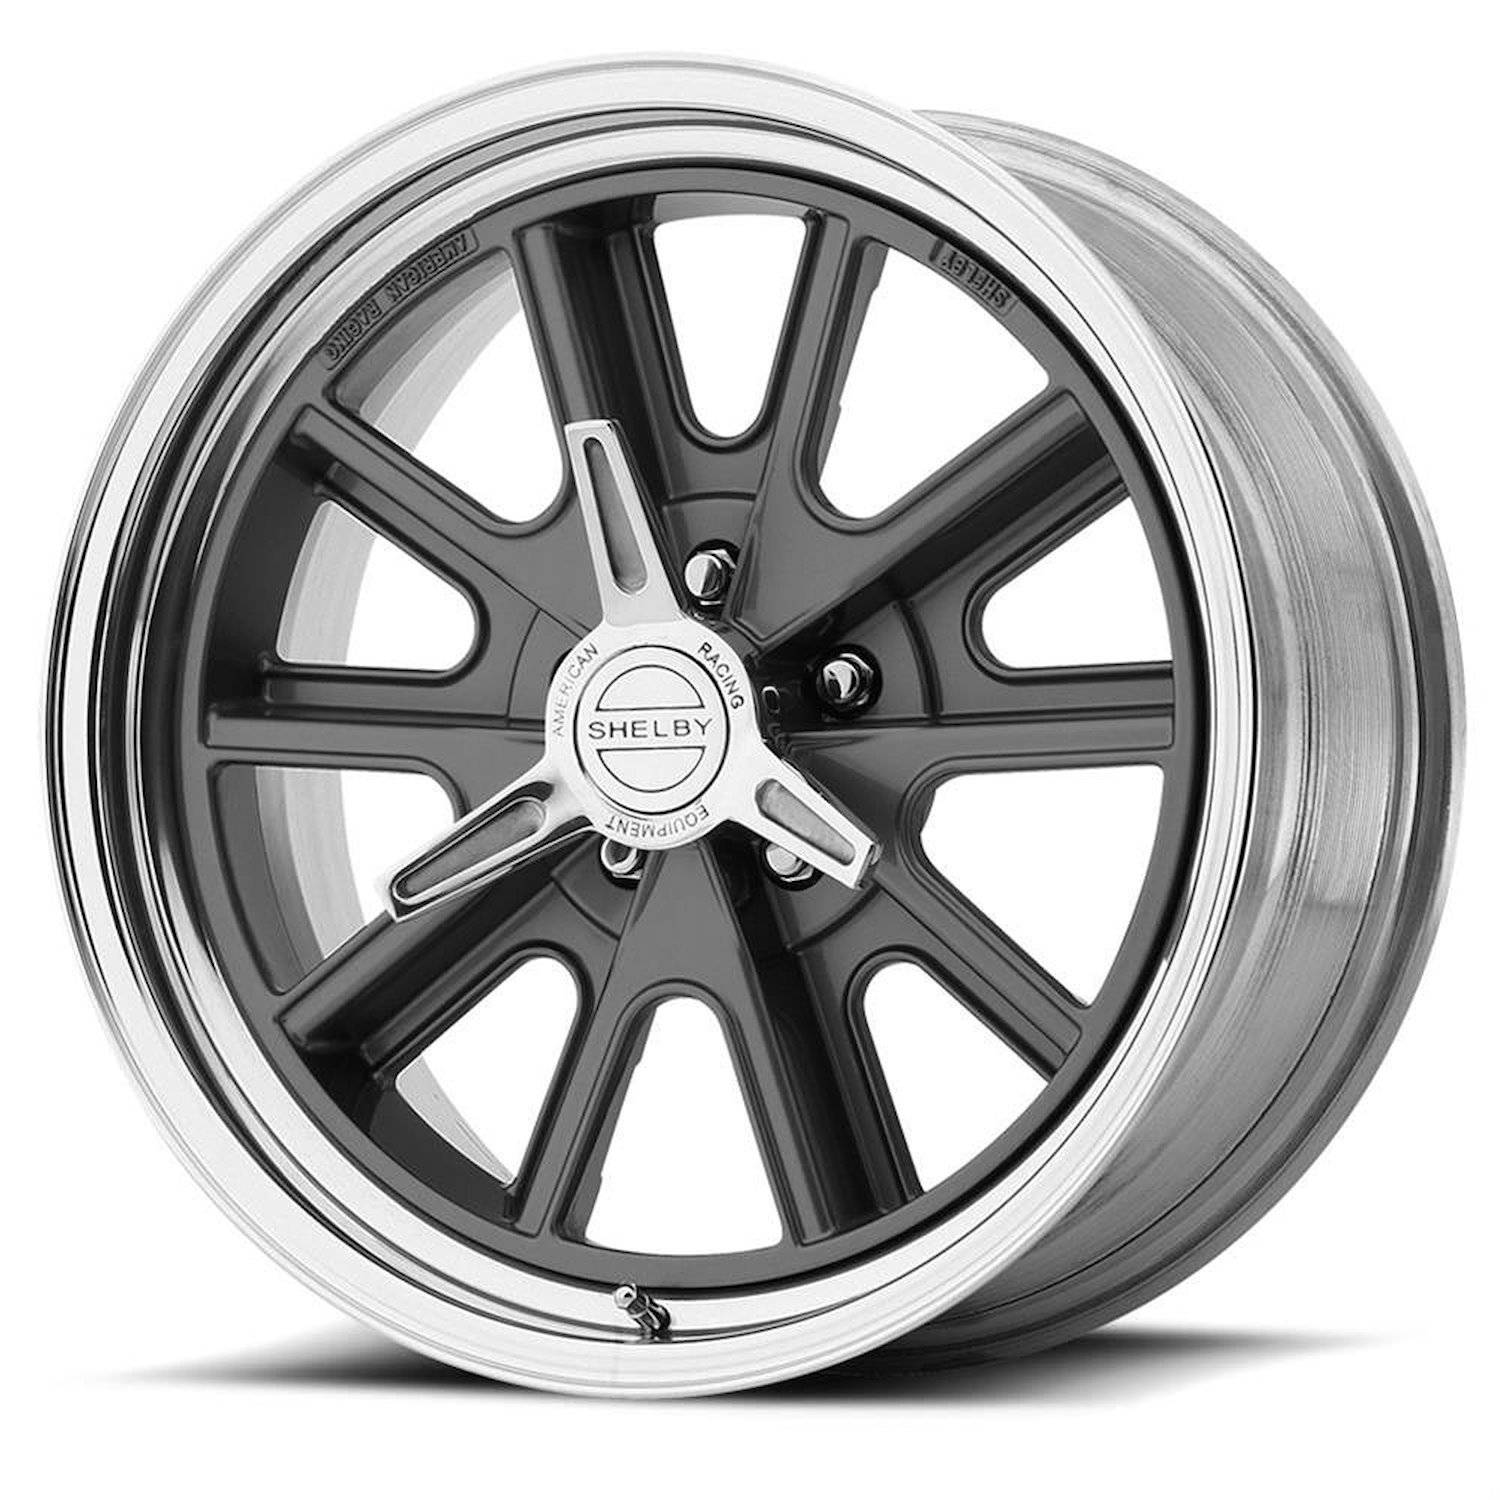 AMERICAN RACING 427 SHELBY COBRA TWO-PIECE MAG GRAY CENTER POLISHED BARREL 18 x 9.5 5x4.5 -32 3.99